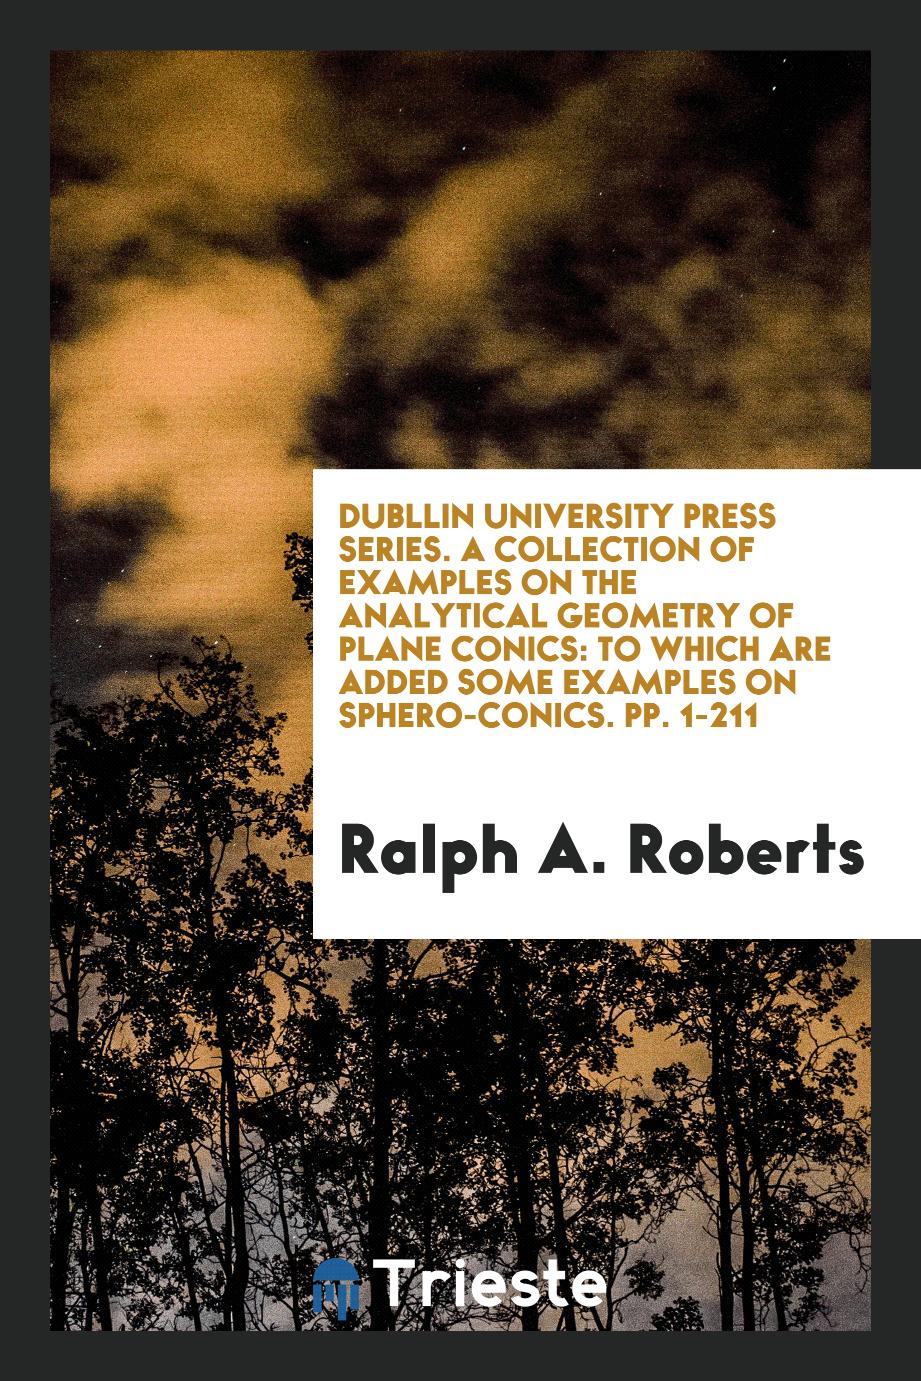 Dubllin University Press Series. A Collection of Examples on the Analytical Geometry of Plane Conics: To which are Added Some Examples on Sphero-Conics. pp. 1-211